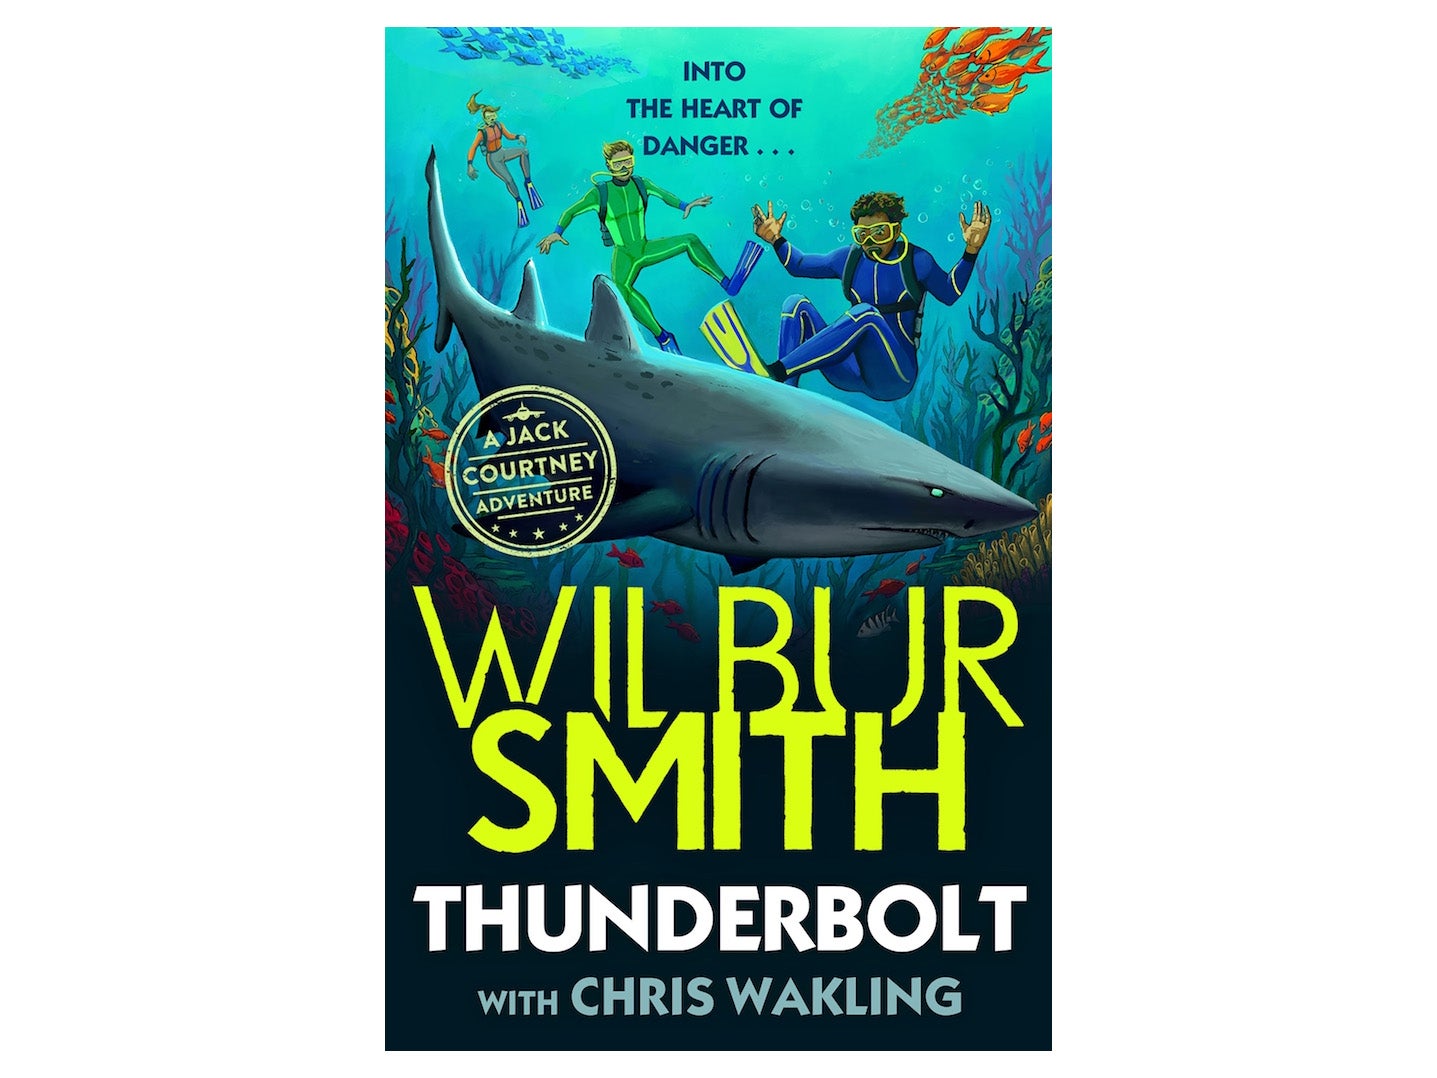 ‘Thunderbolt’ by Wilbur Smith with Chris Wakling.jpg